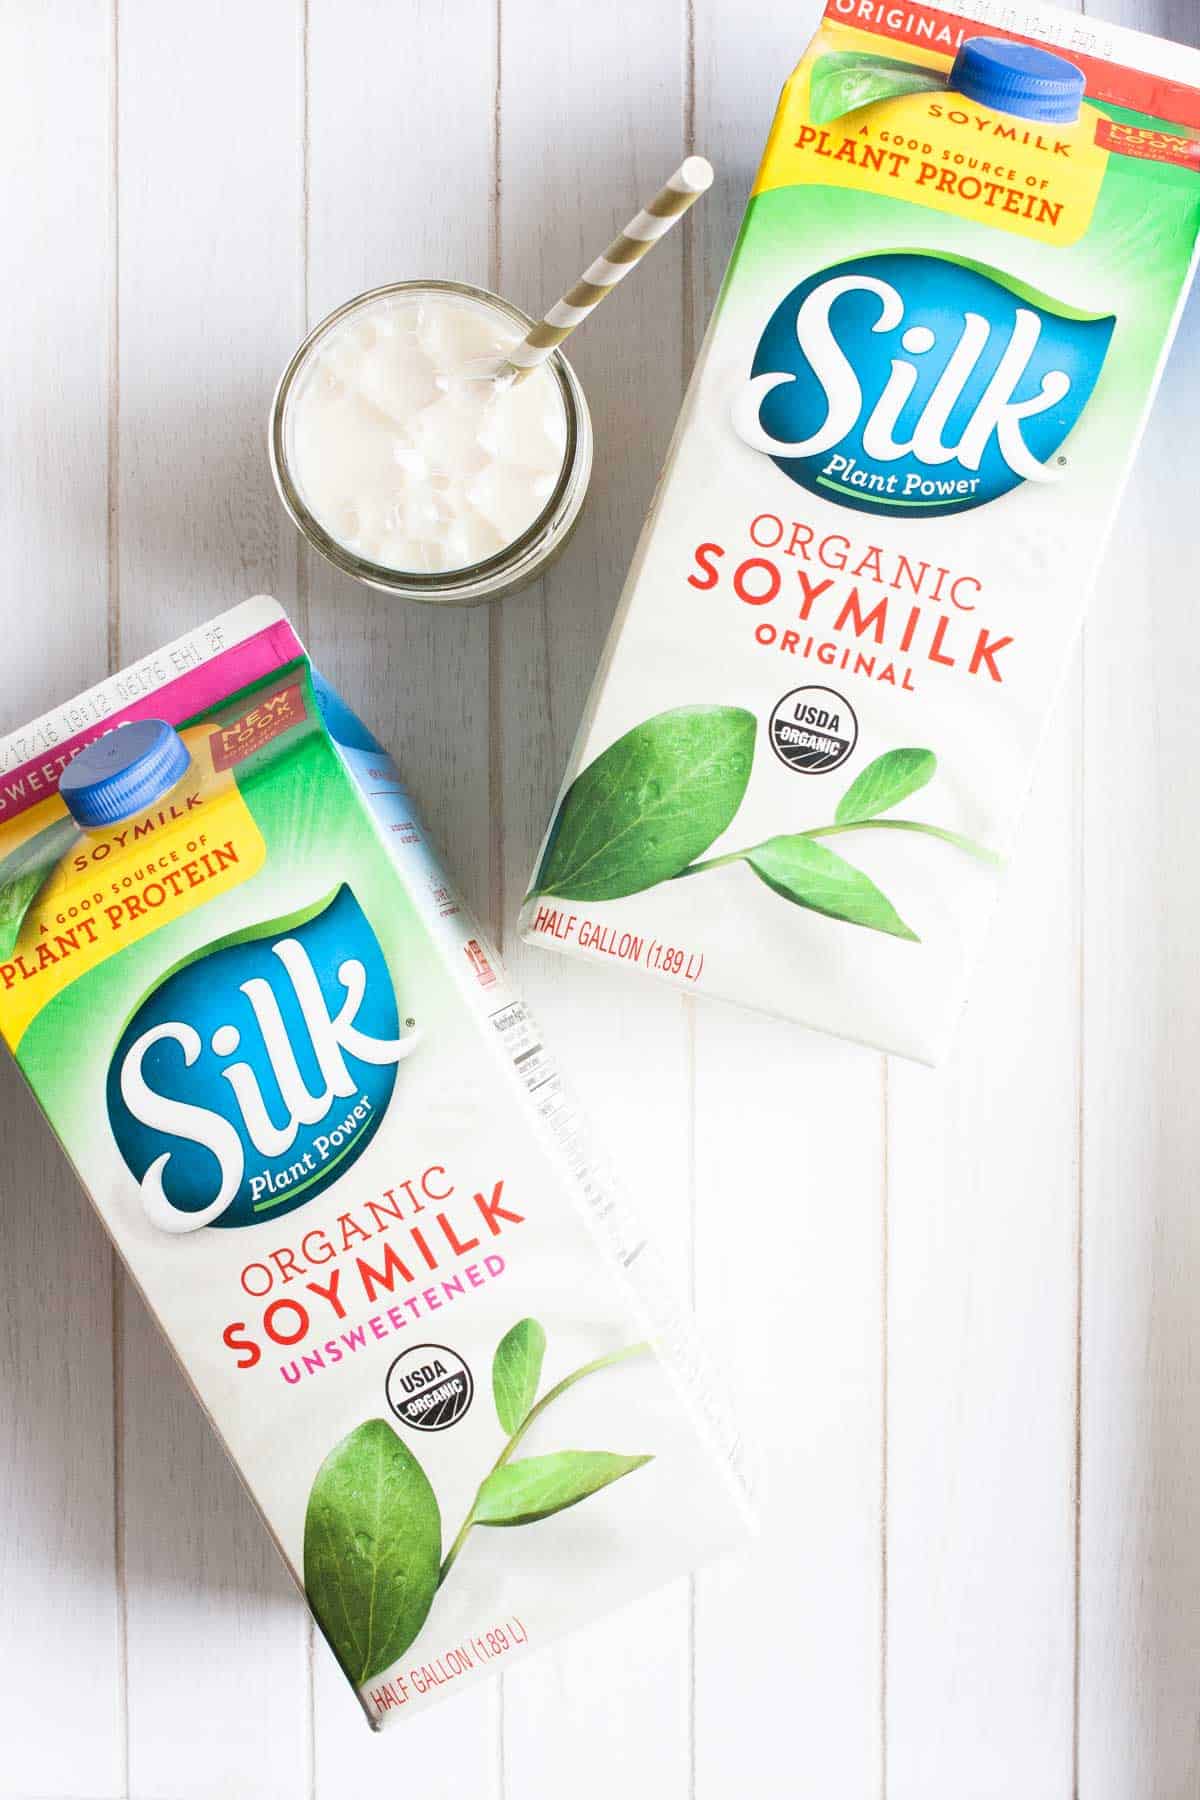 Two cartons of silk brand soy milk laying on a white wood table